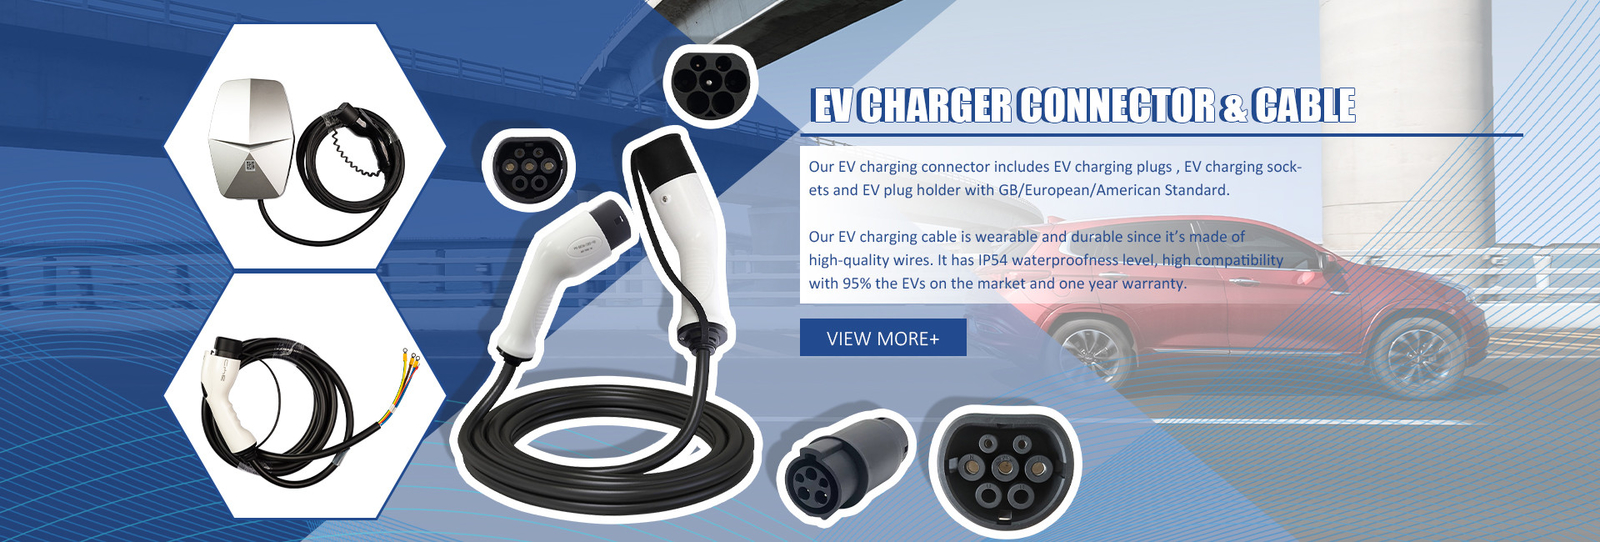 3 Phase EV Charger